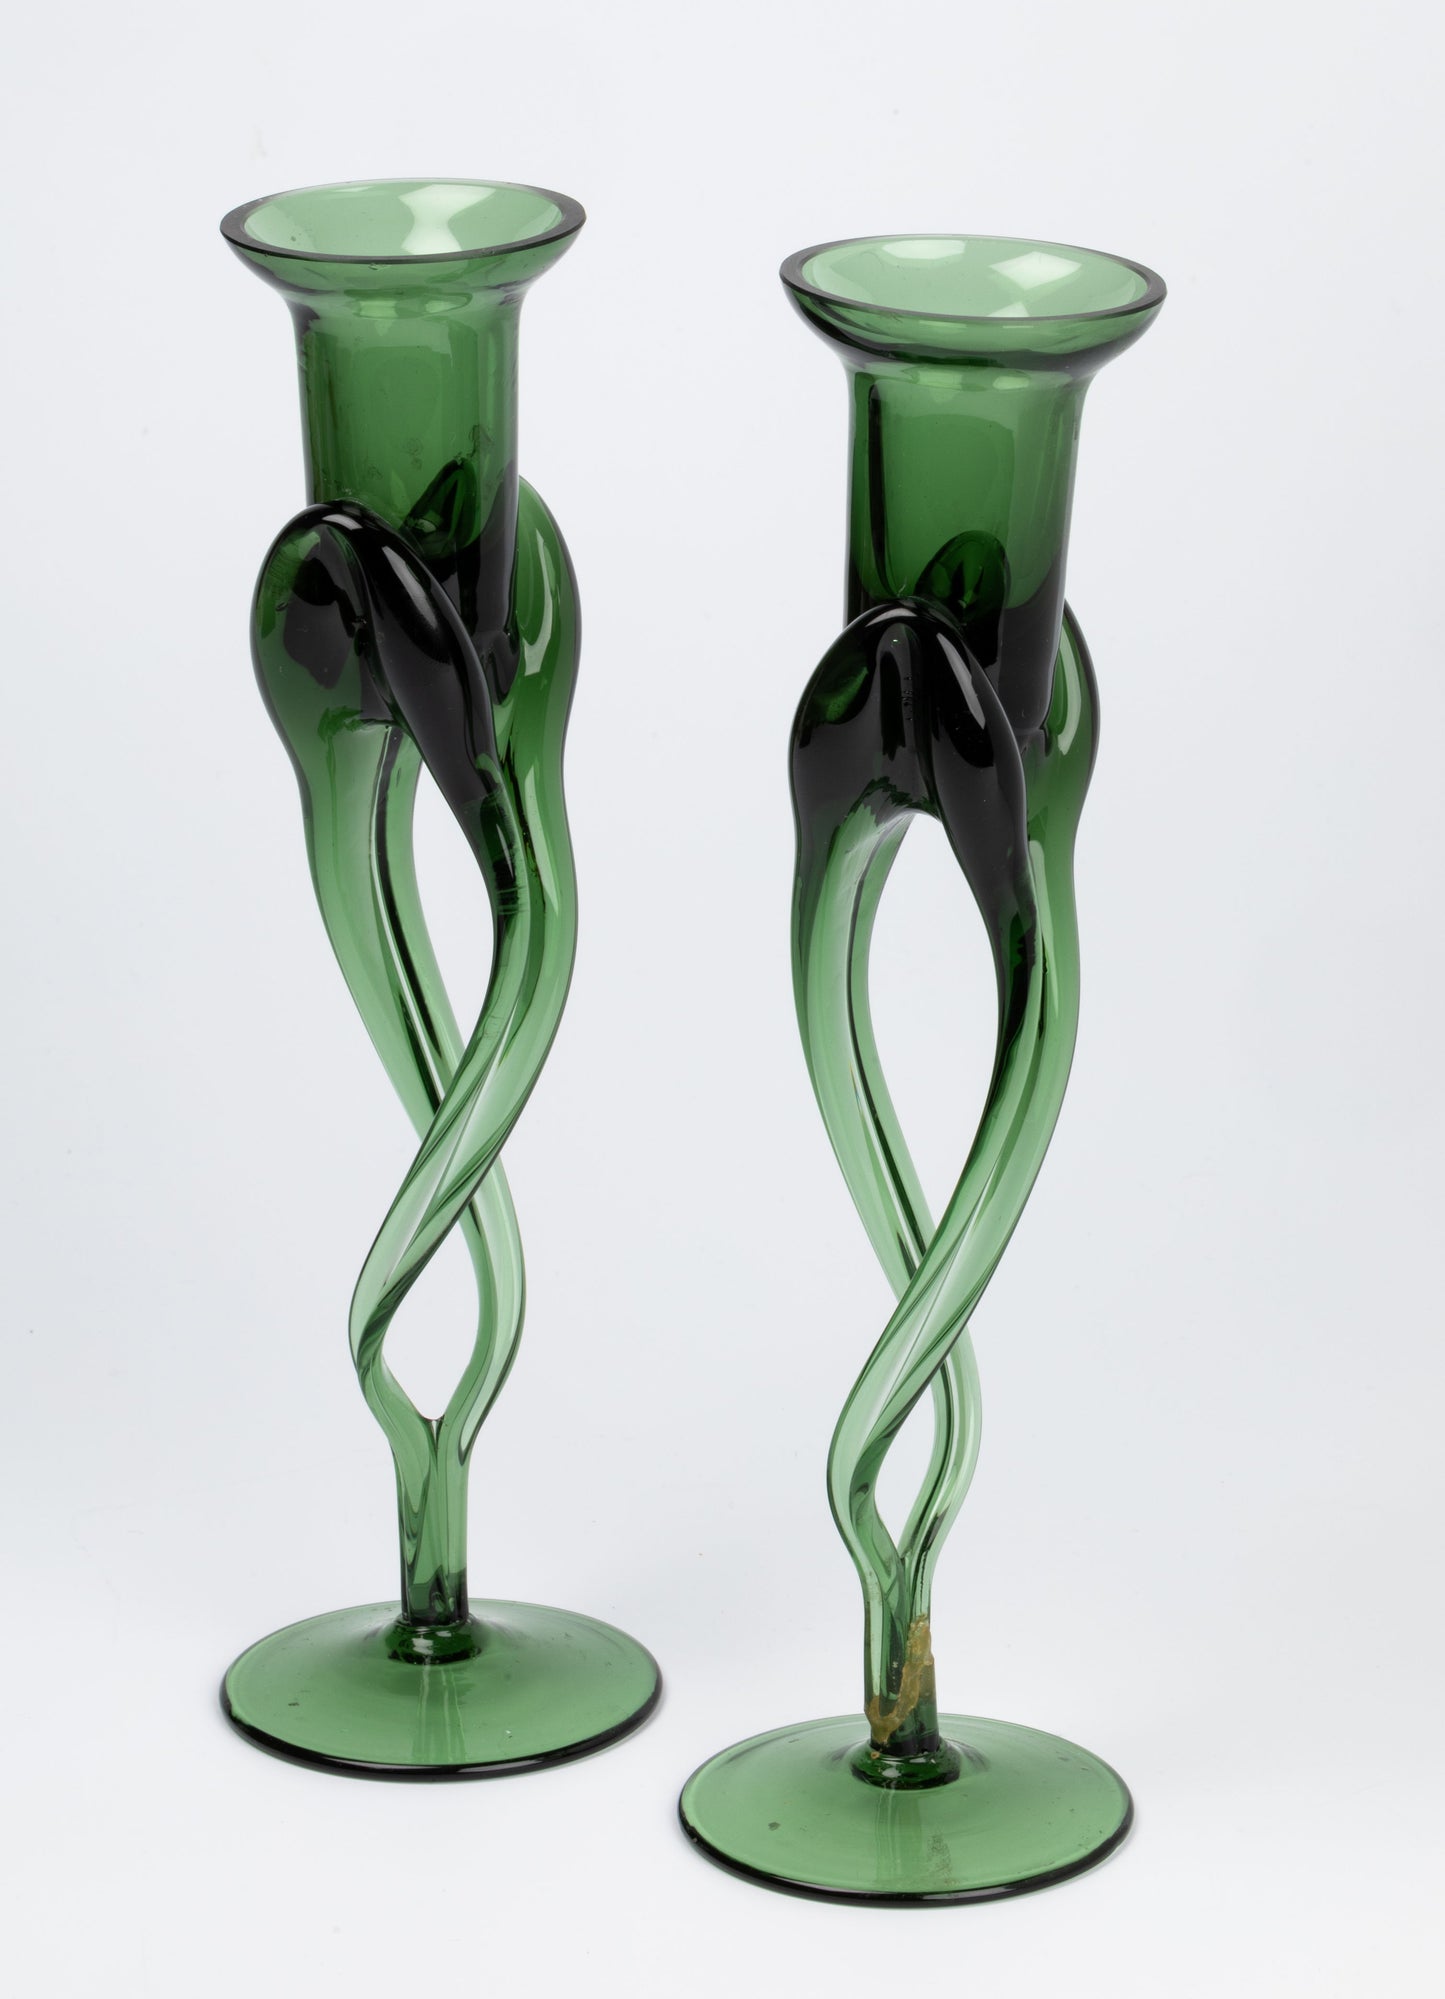 Set of 2 Vintage 1970s Murano Glass Candleholders